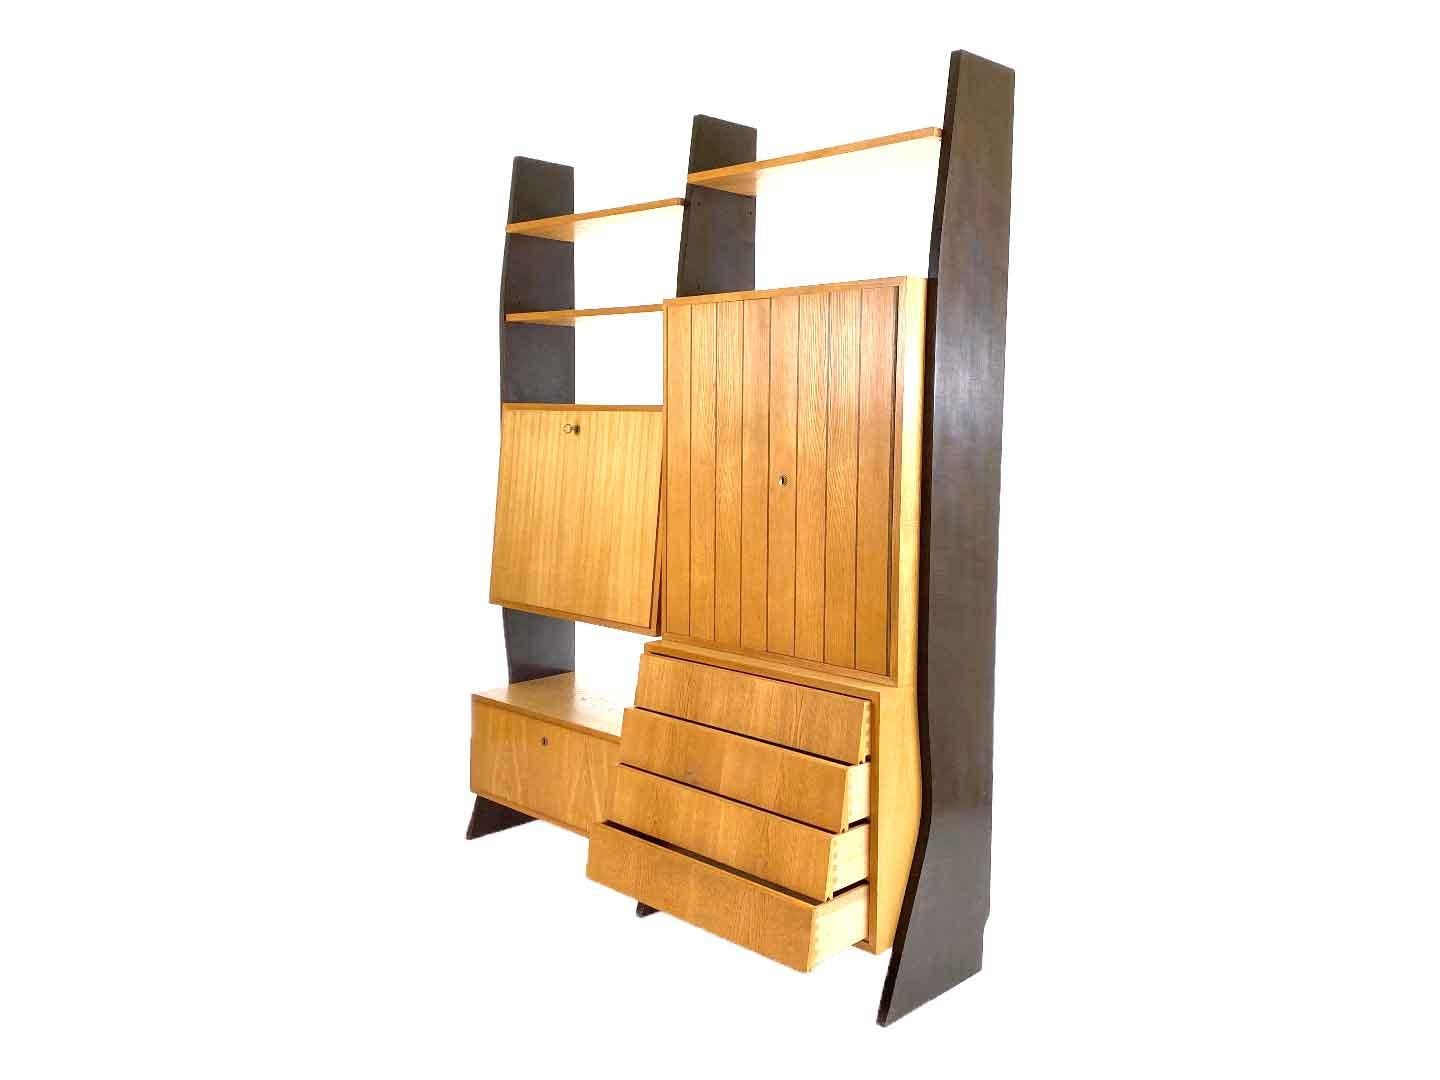 Vintage modernist wall furniture with secretary by erich stratmann for idee möbel, produced in 1959 in Germany. The wall furniture has two doors with two shelves behind, one lap, four drawers, three shelves and a secretary with light. The wall